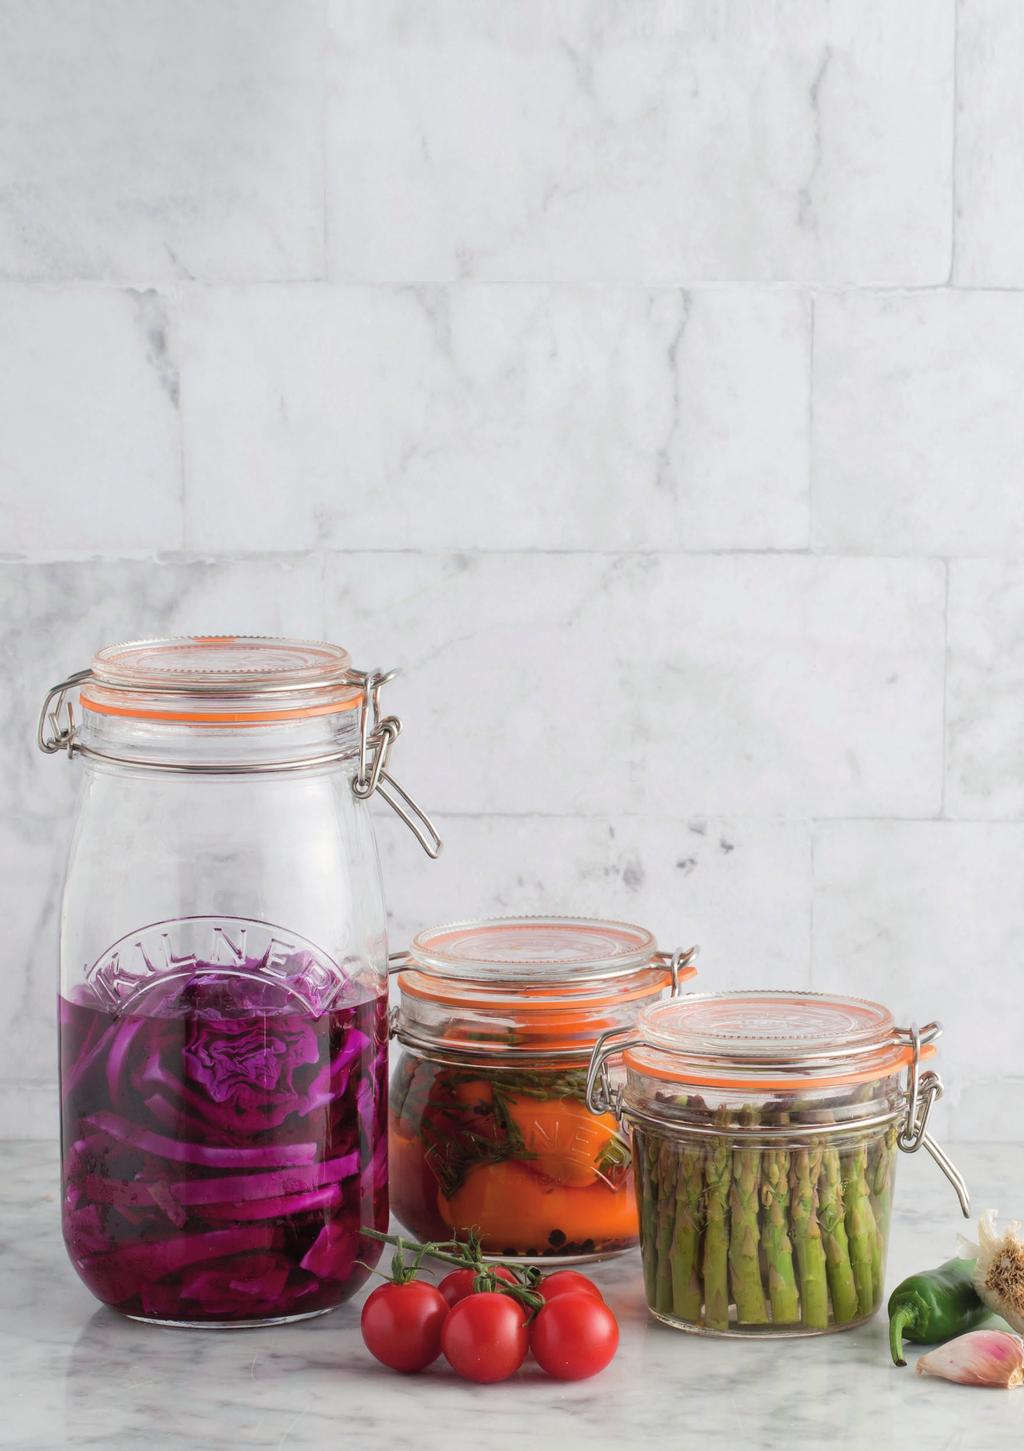 The Kilner Story For 176 years the original Kilner Jar has captured the attention of the curious cook. First invented by John Kilner and Co in 1842 England, Kilner Jars keep food fresher for longer.